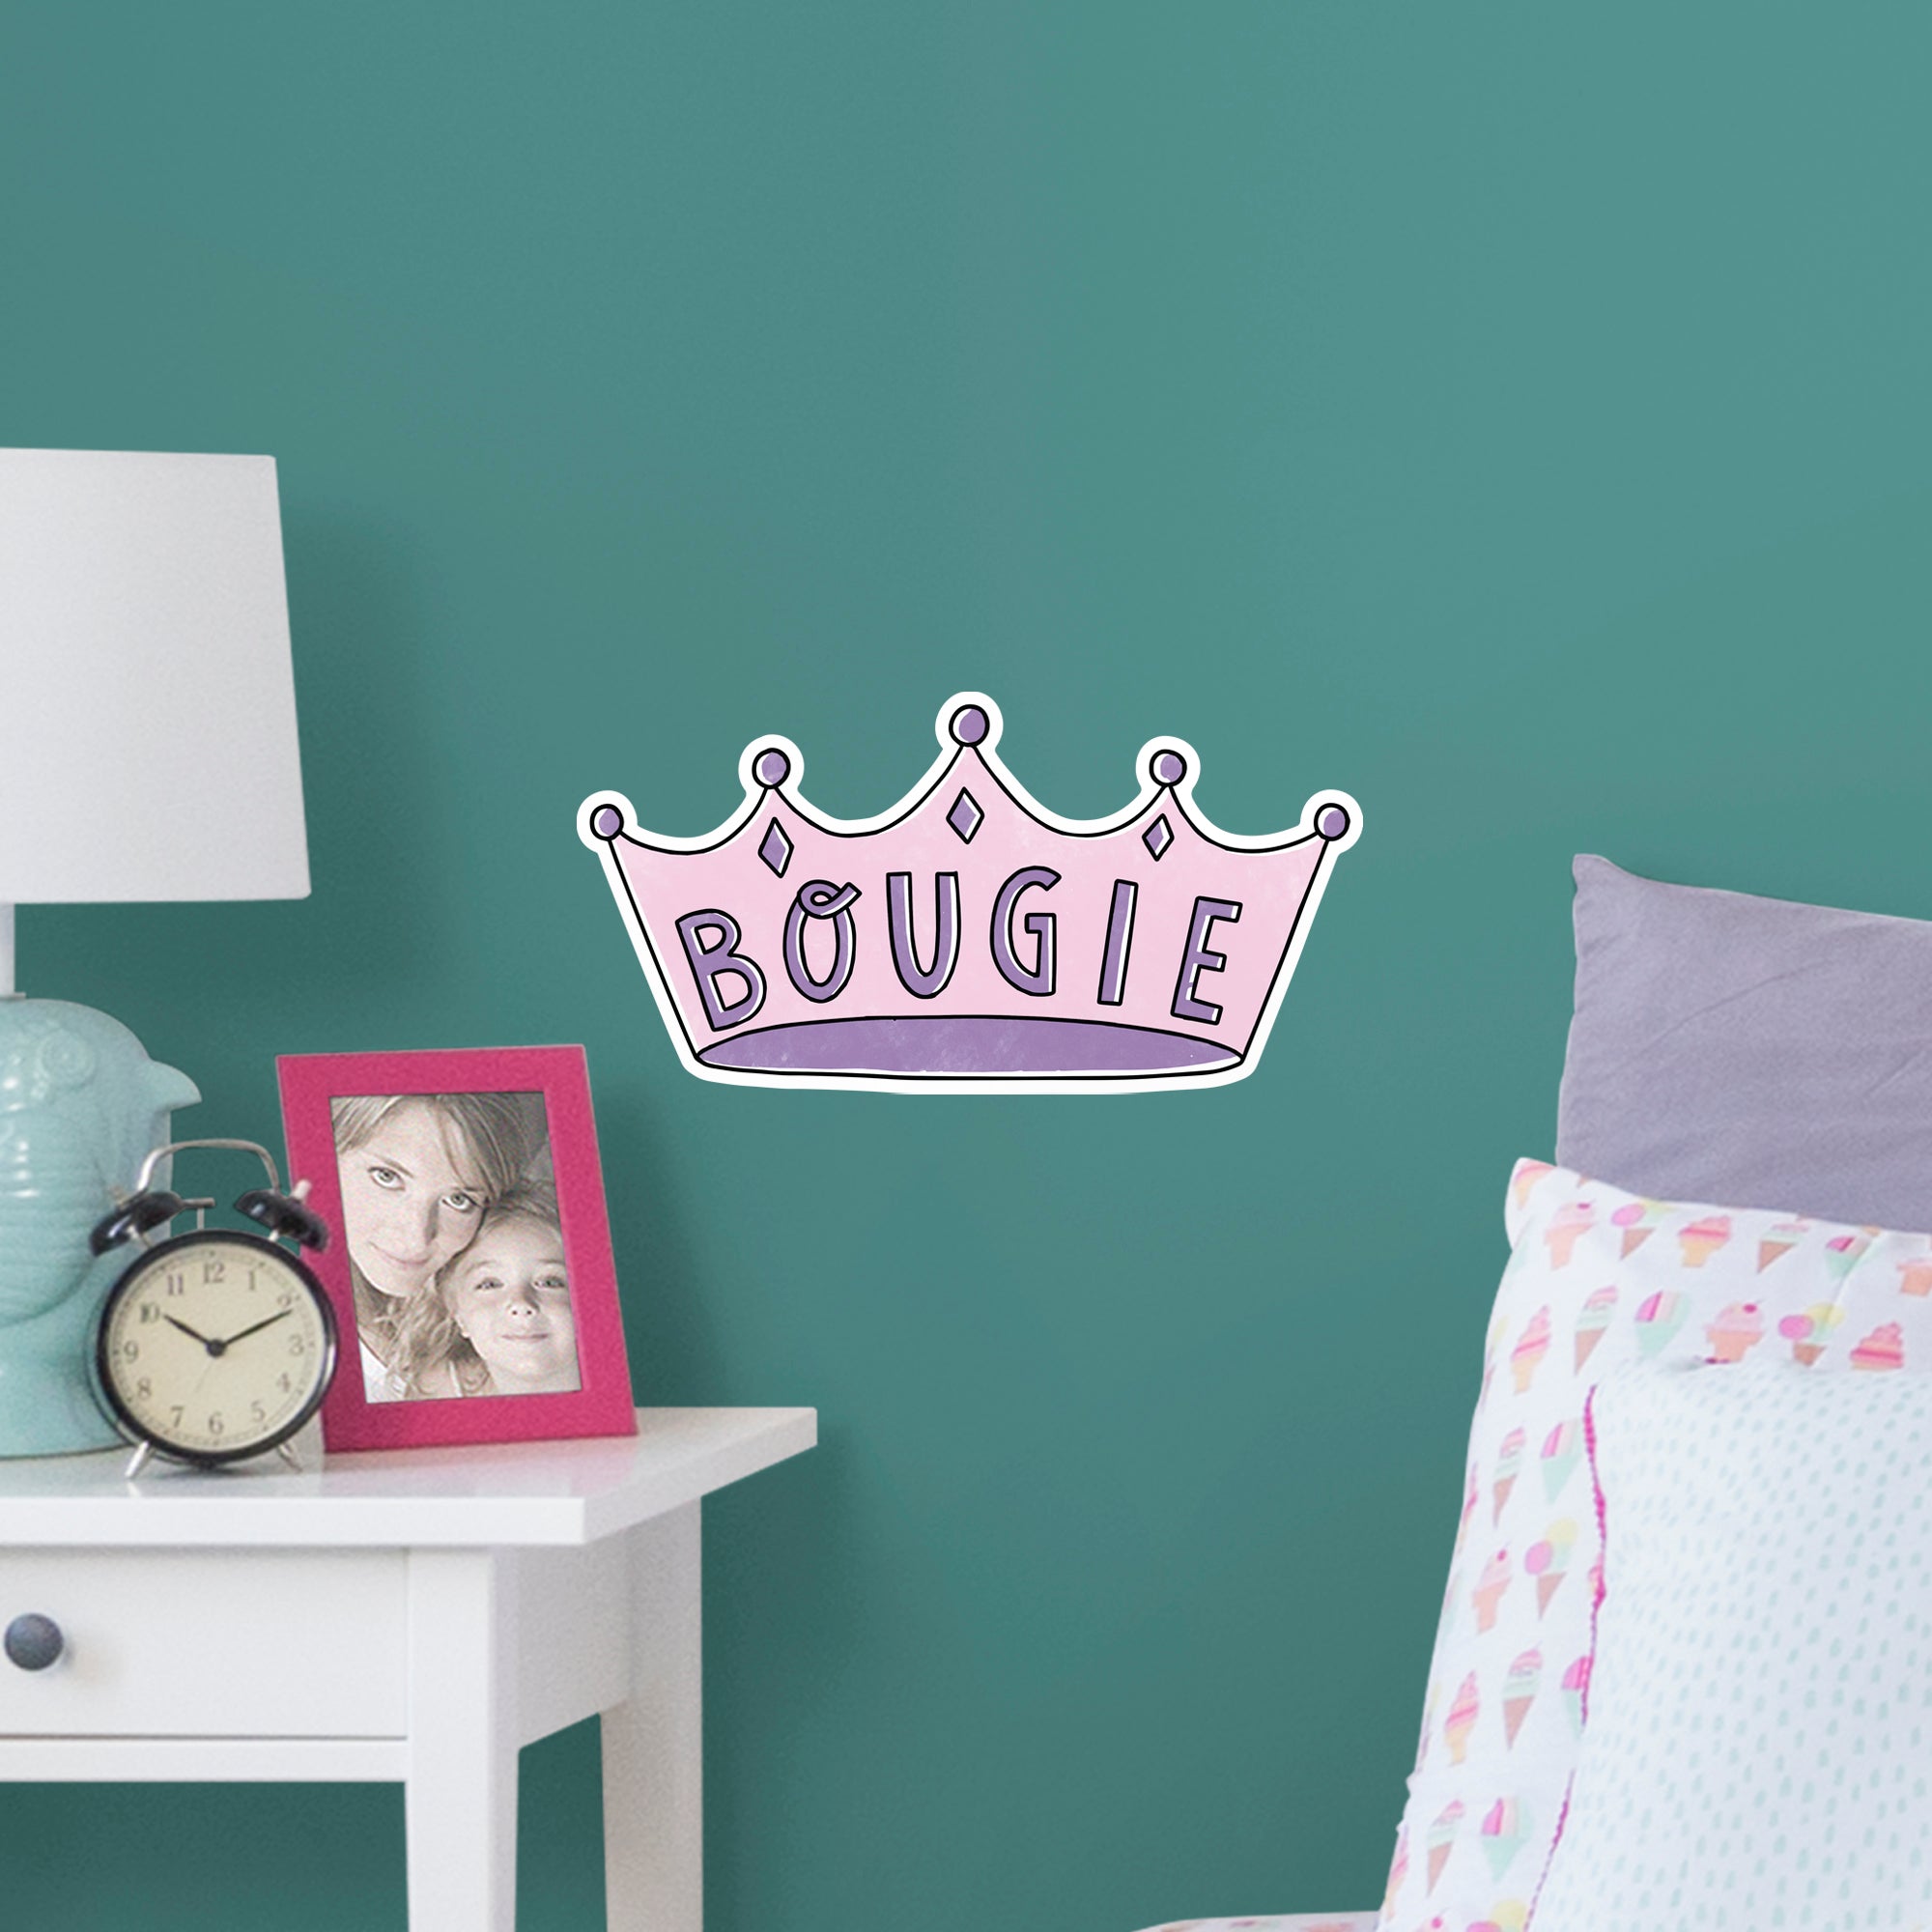 Bougie Crown - Officially Licensed Big Moods Removable Wall Decal Large by Fathead | Vinyl